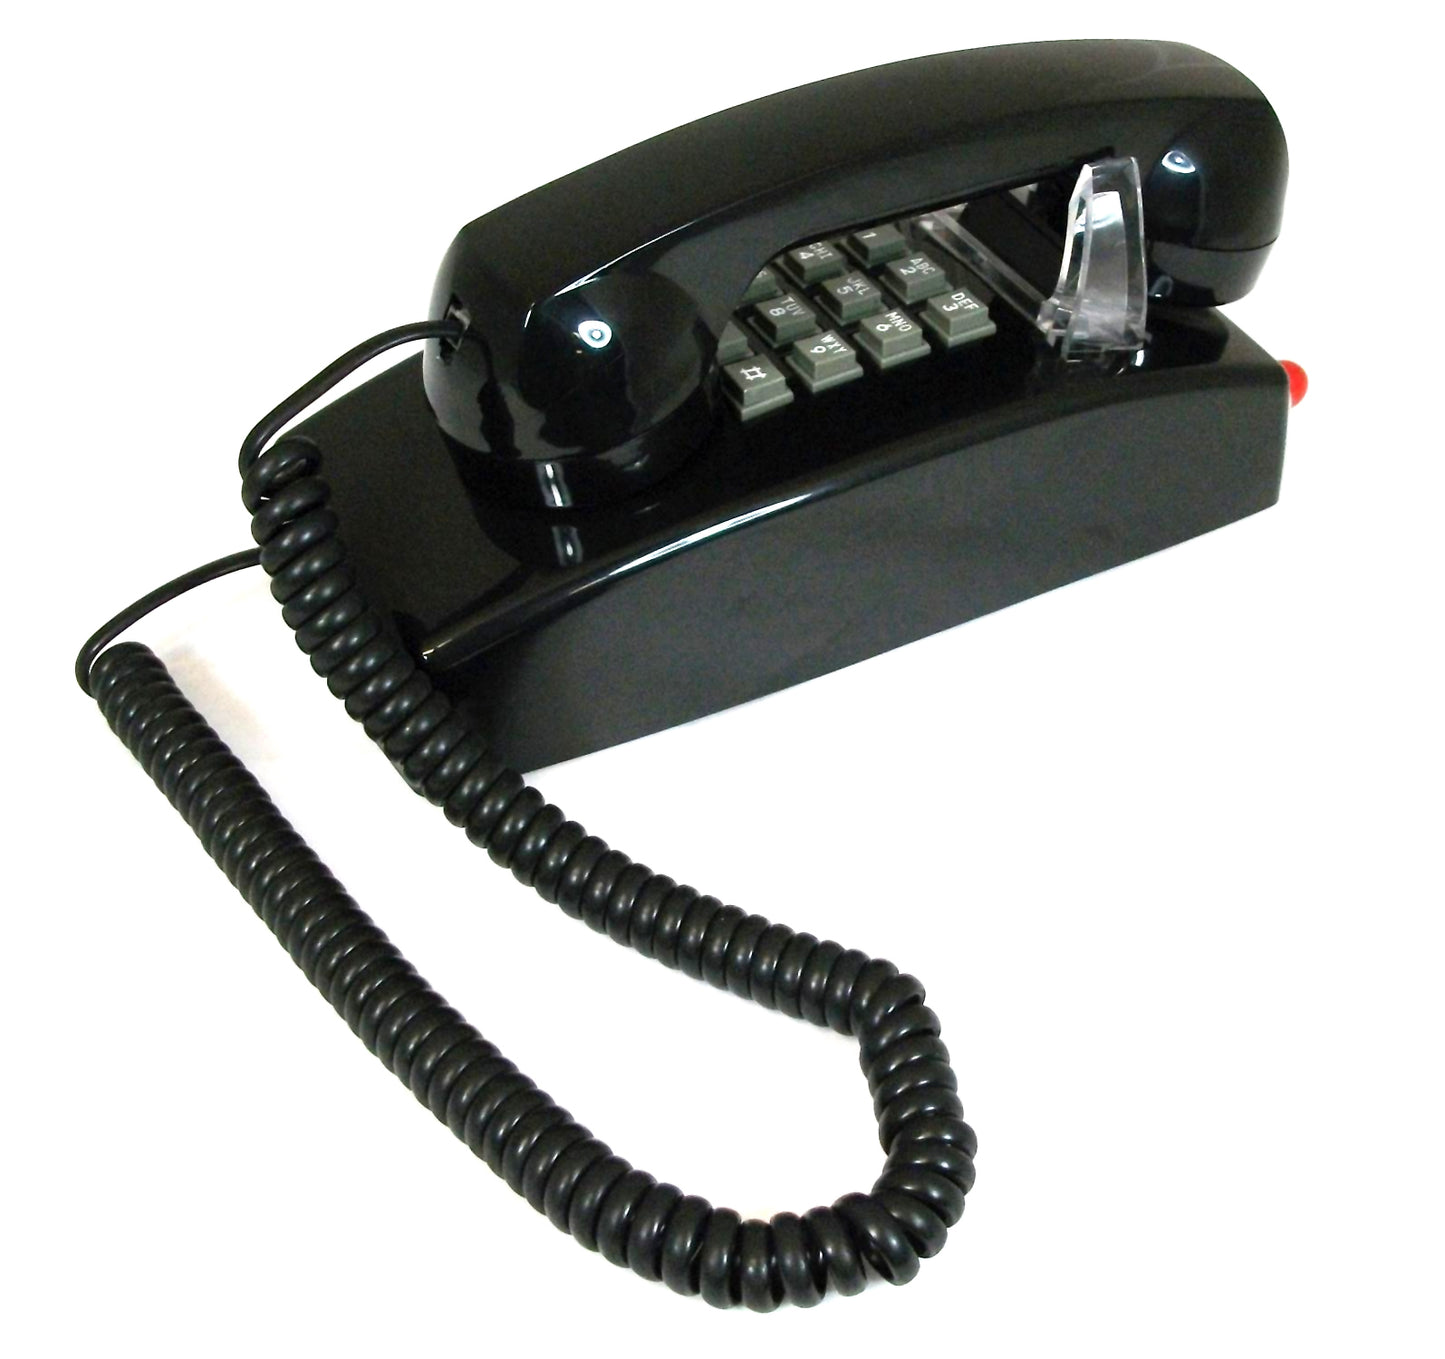 Cortelco 2554-27MD-BK 255400-vba-27md Wall Telephone, Message Waiting